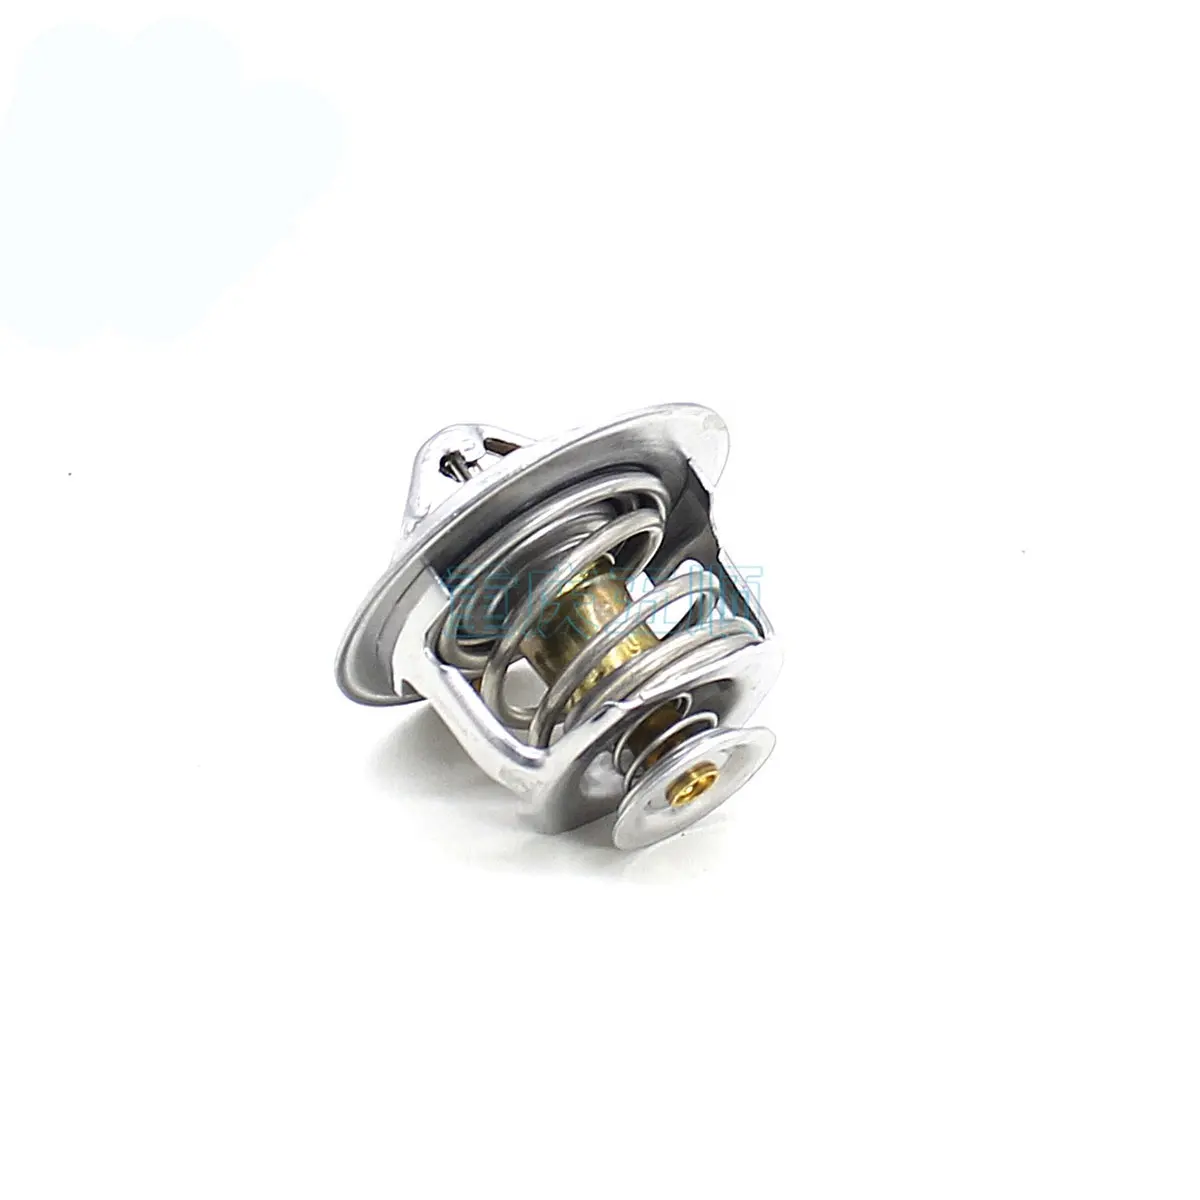 high-quality Ford /ISUZU 493C/Ruifeng2.8/Great wall Automotive Engine Thermostat be current 1658103